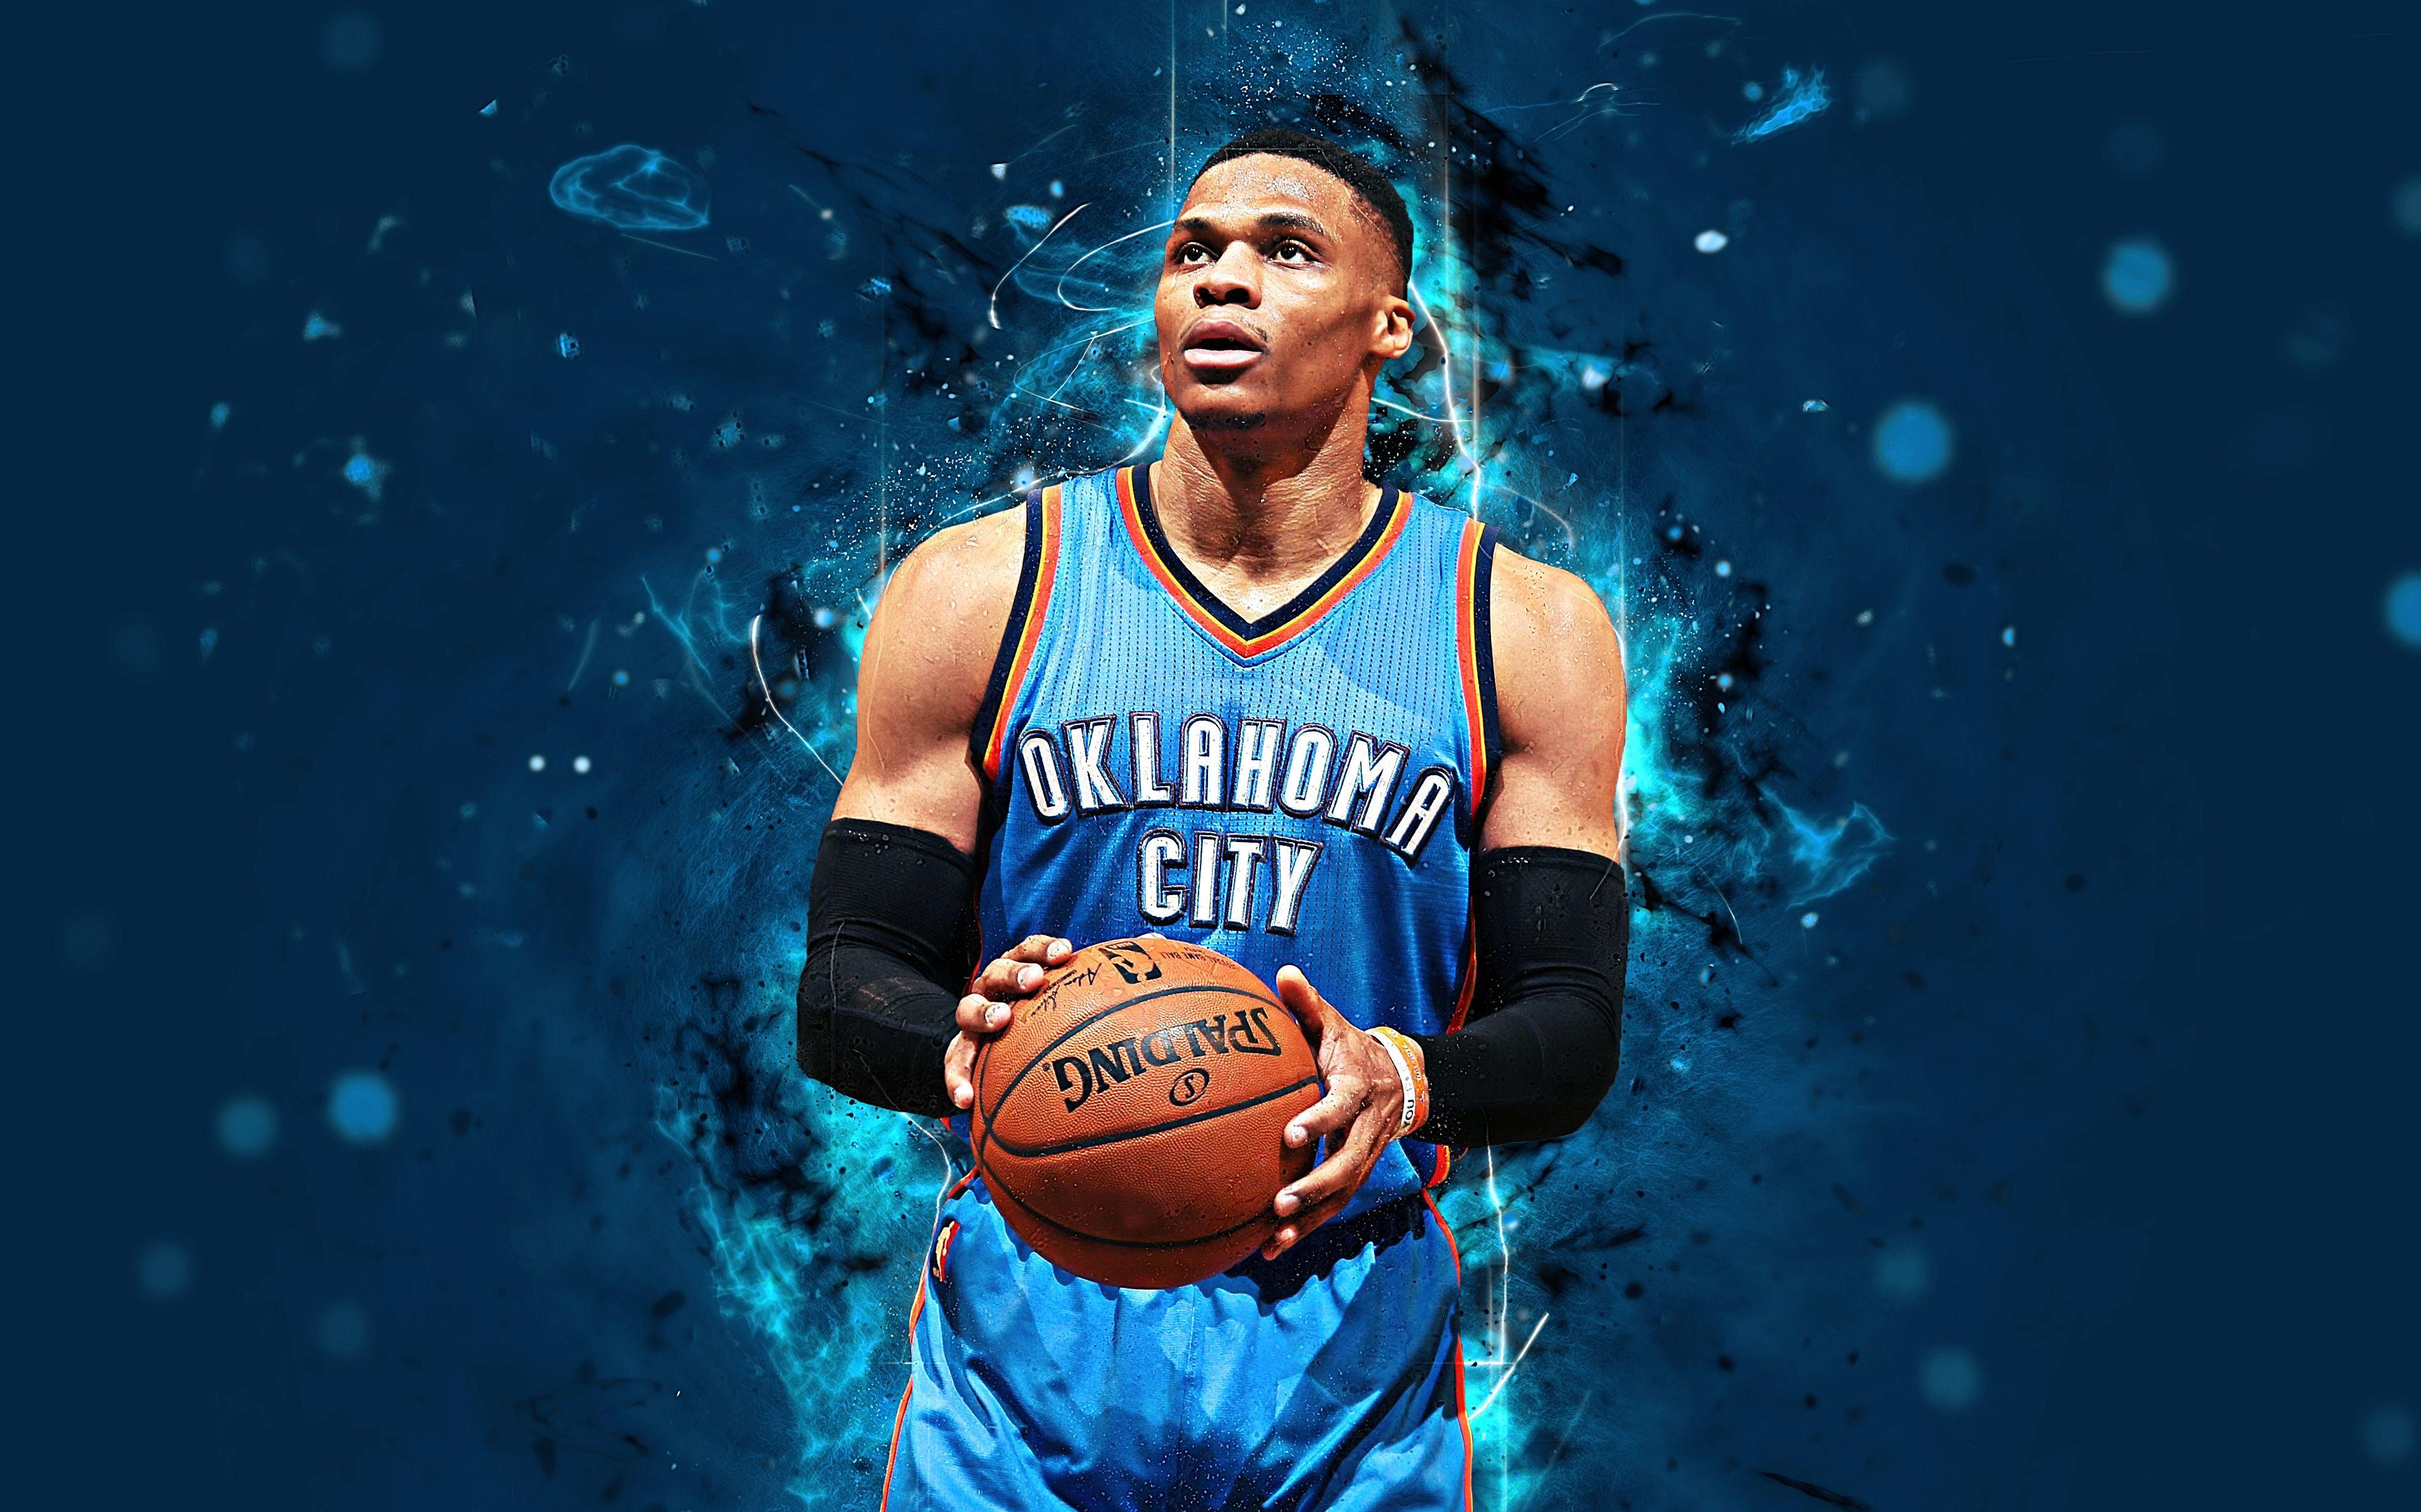 Russell Westbrook Wallpaper On